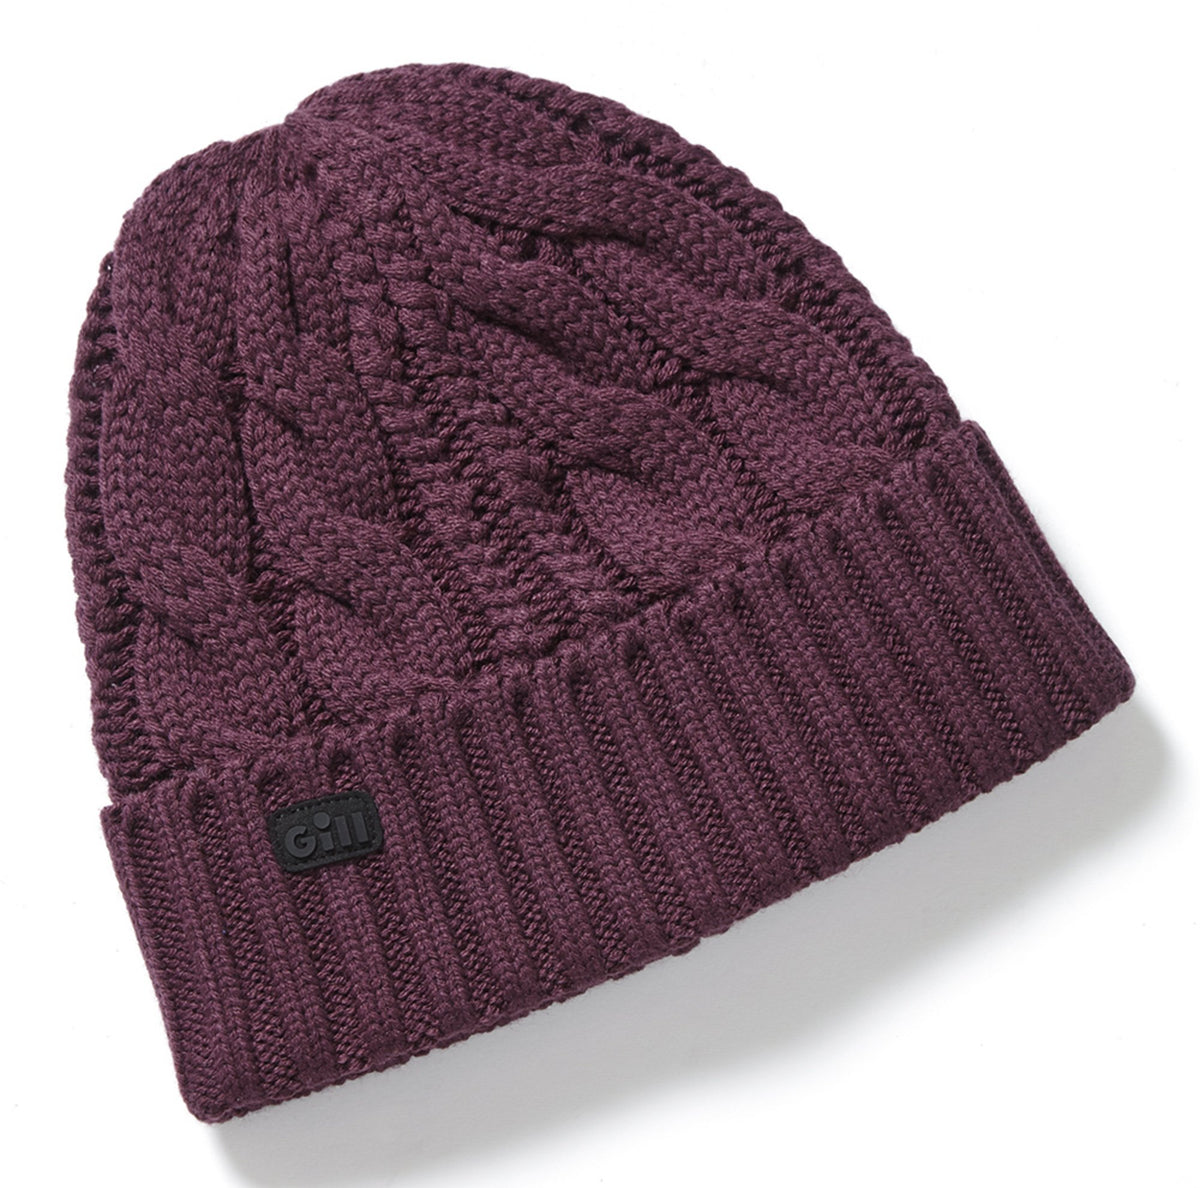 GILL Cable Knit Beanie - One Size